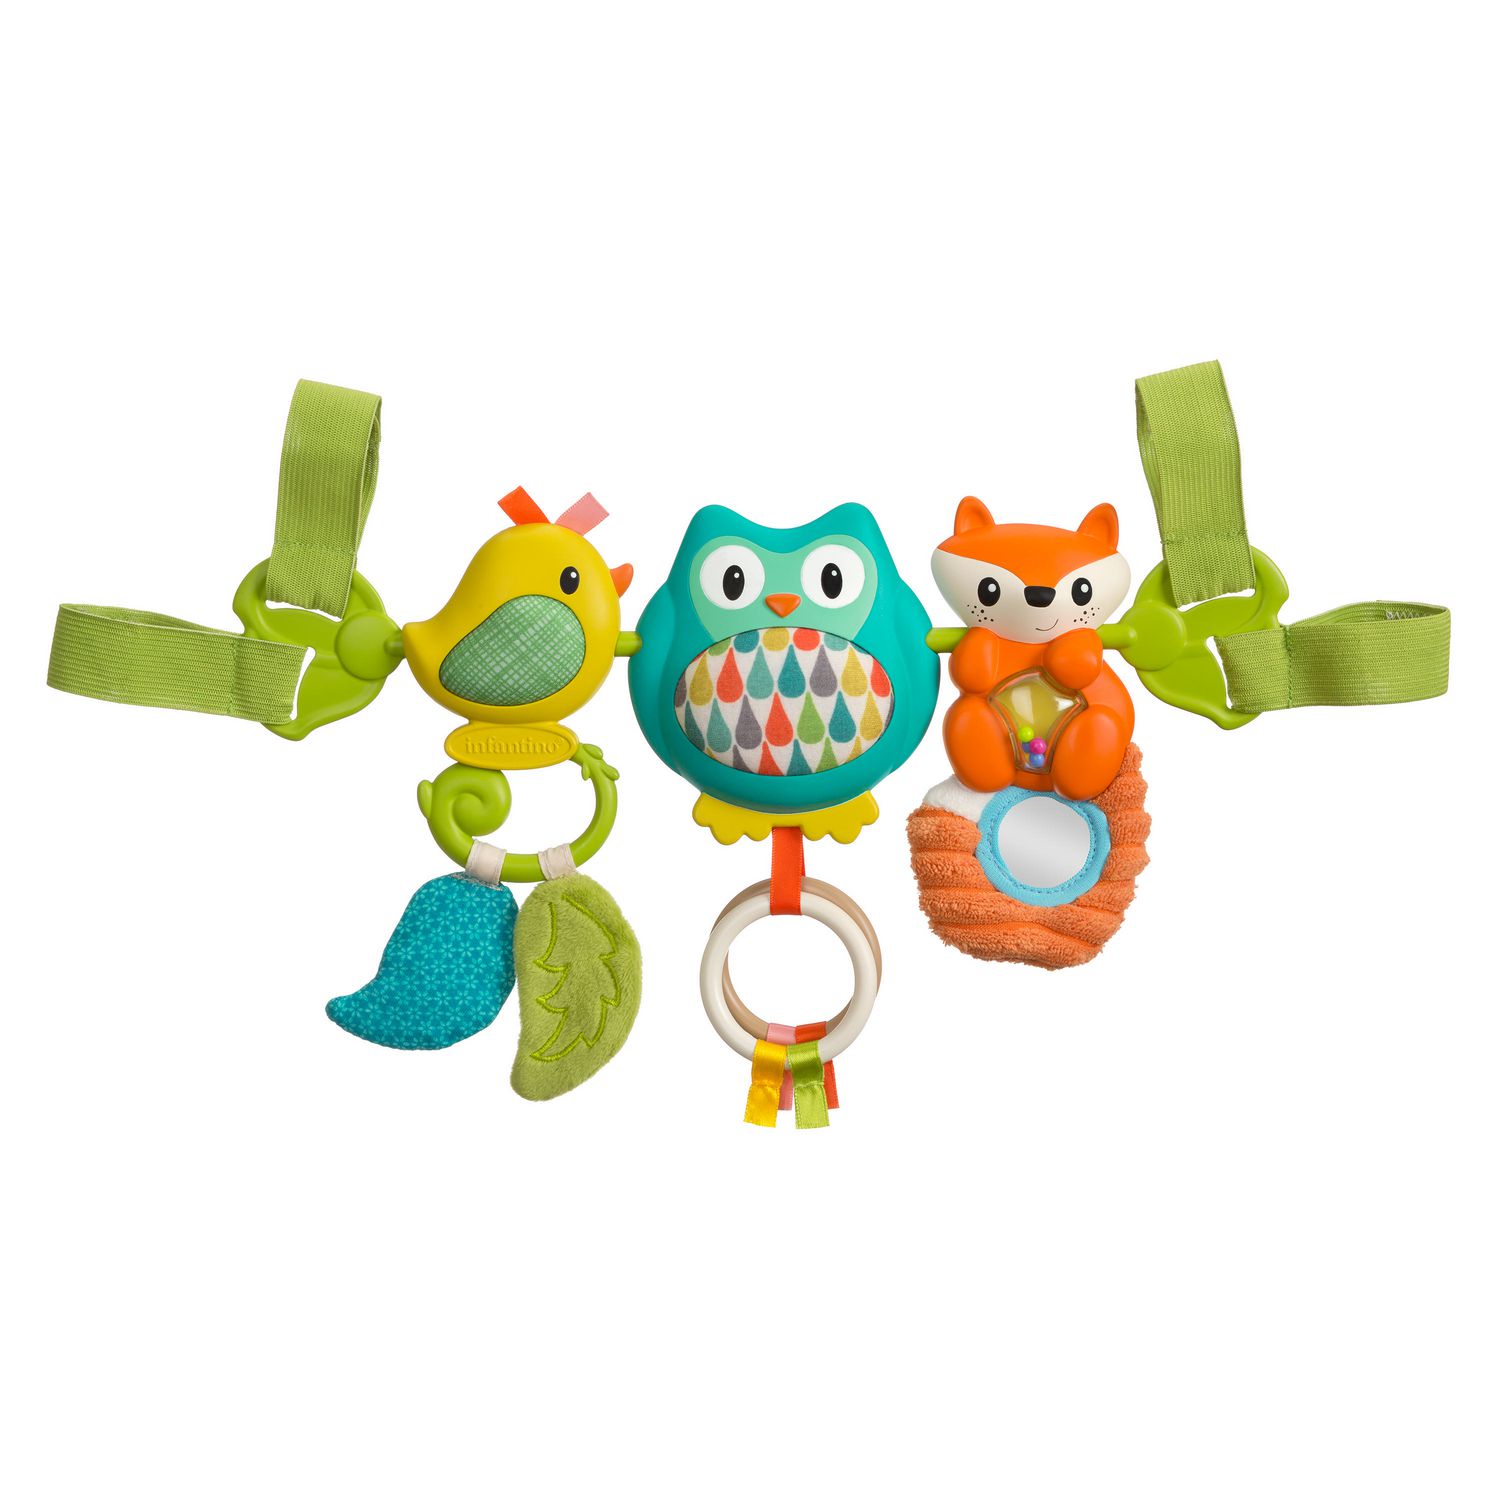 Infantino Teether & Rattles Baby Gift Set, 11 Pieces, 11 piece rattle,  teether & link set 